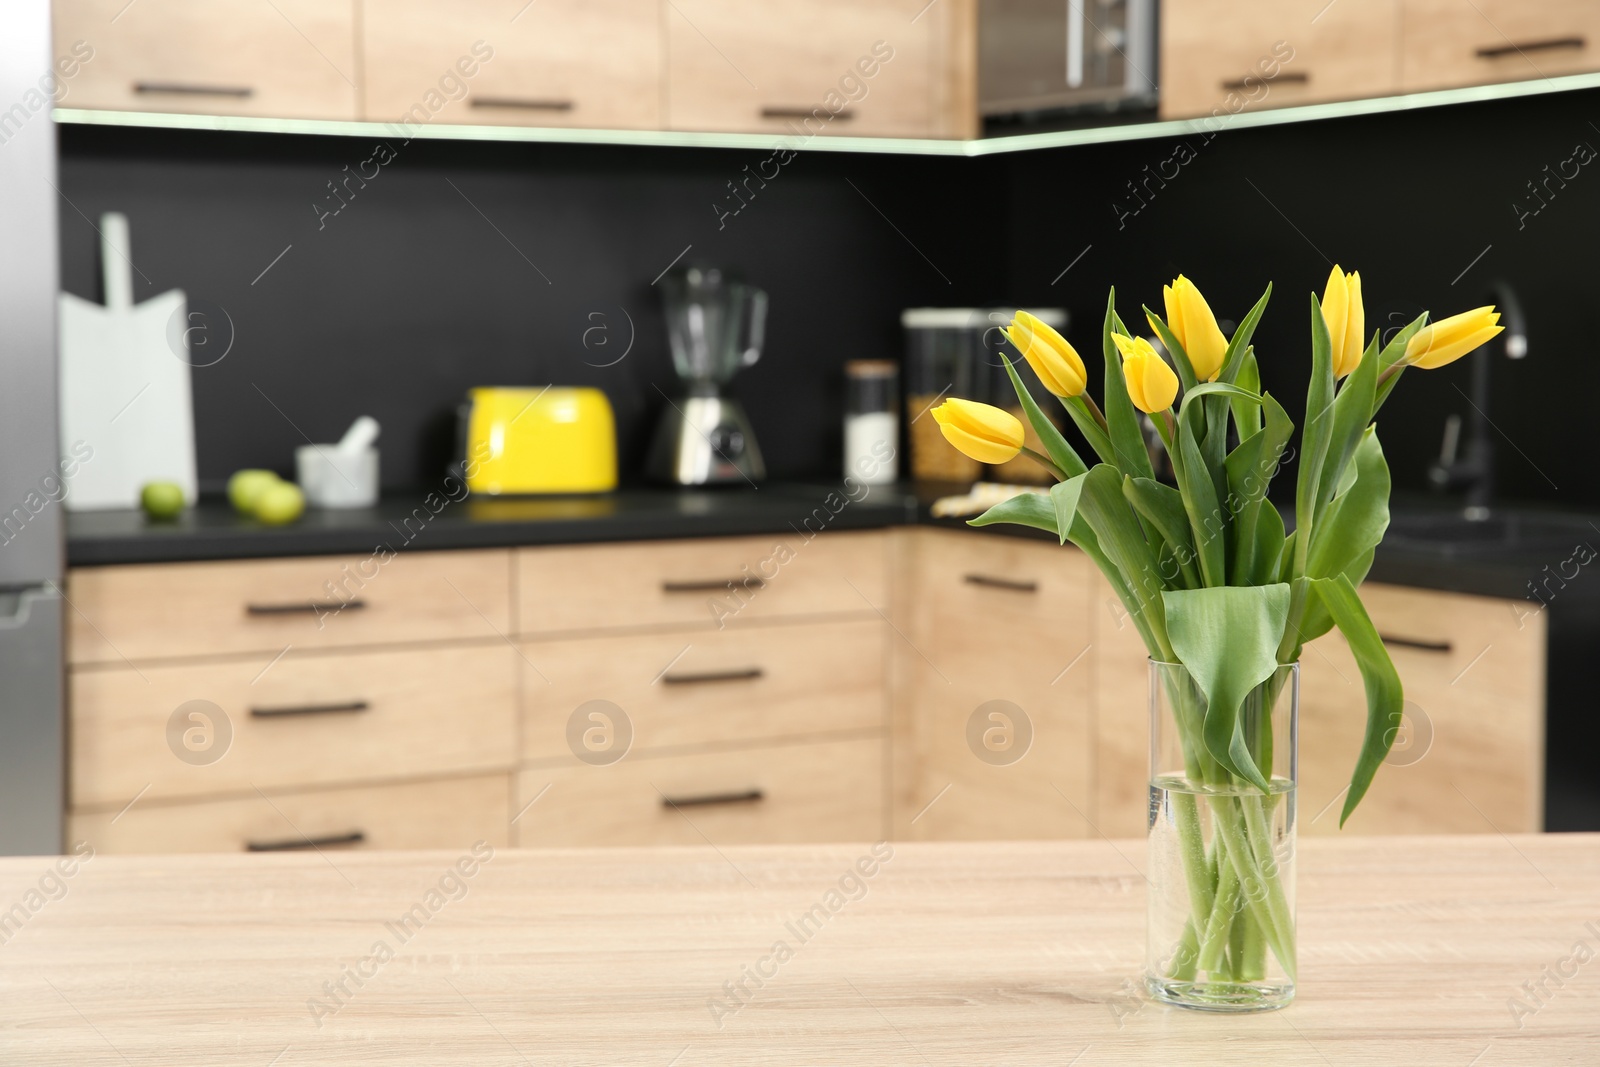 Photo of Glass vase with tulips on table in kitchen